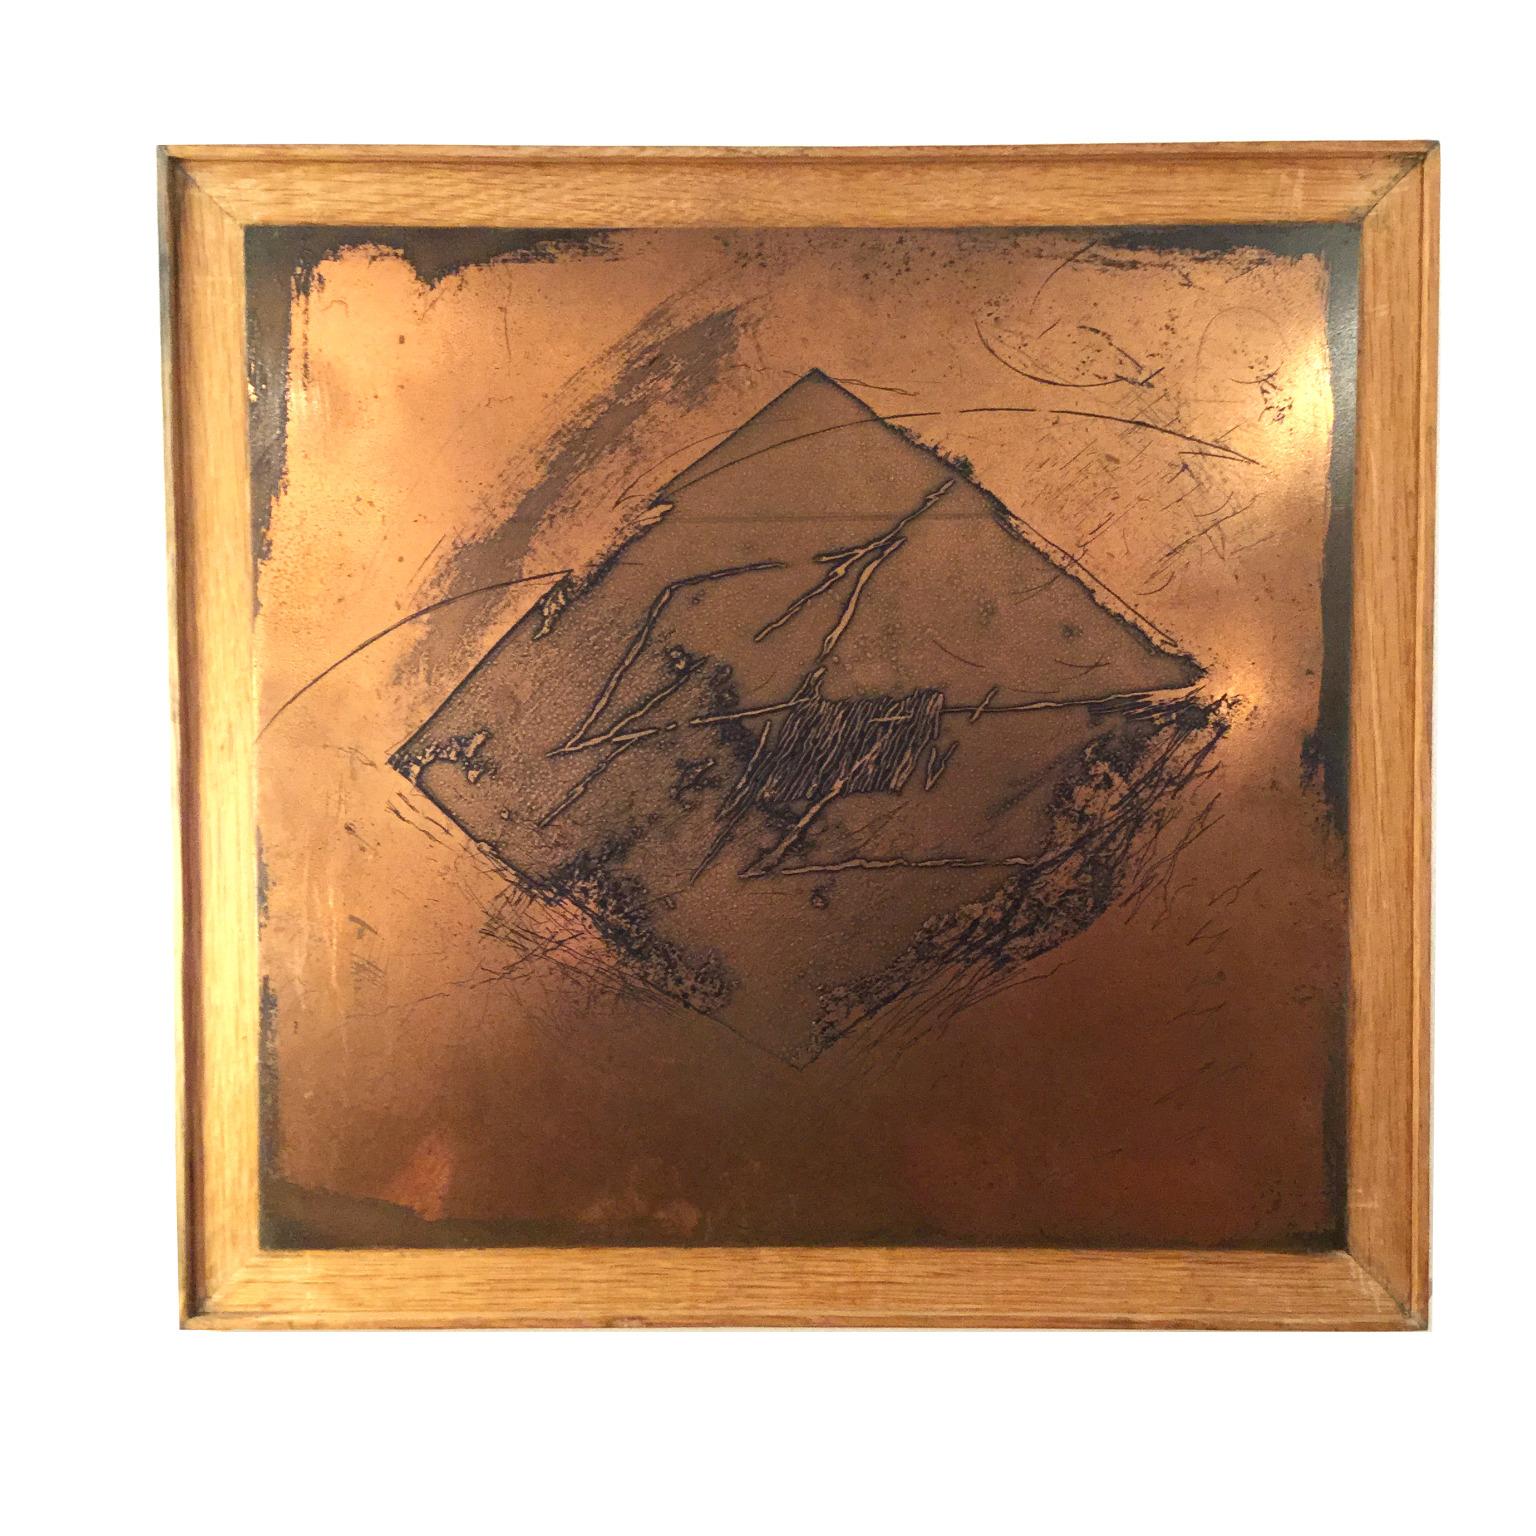 Set of three contemporary engraving matrix on copper plates by an unknown Artist
Each of different sizes has been framed in an oak frame.

Small size: 43cm length, 40cm high, 2cm depth
Medium size: 45 length, 43.5cm high, 2cm depth
Large size: